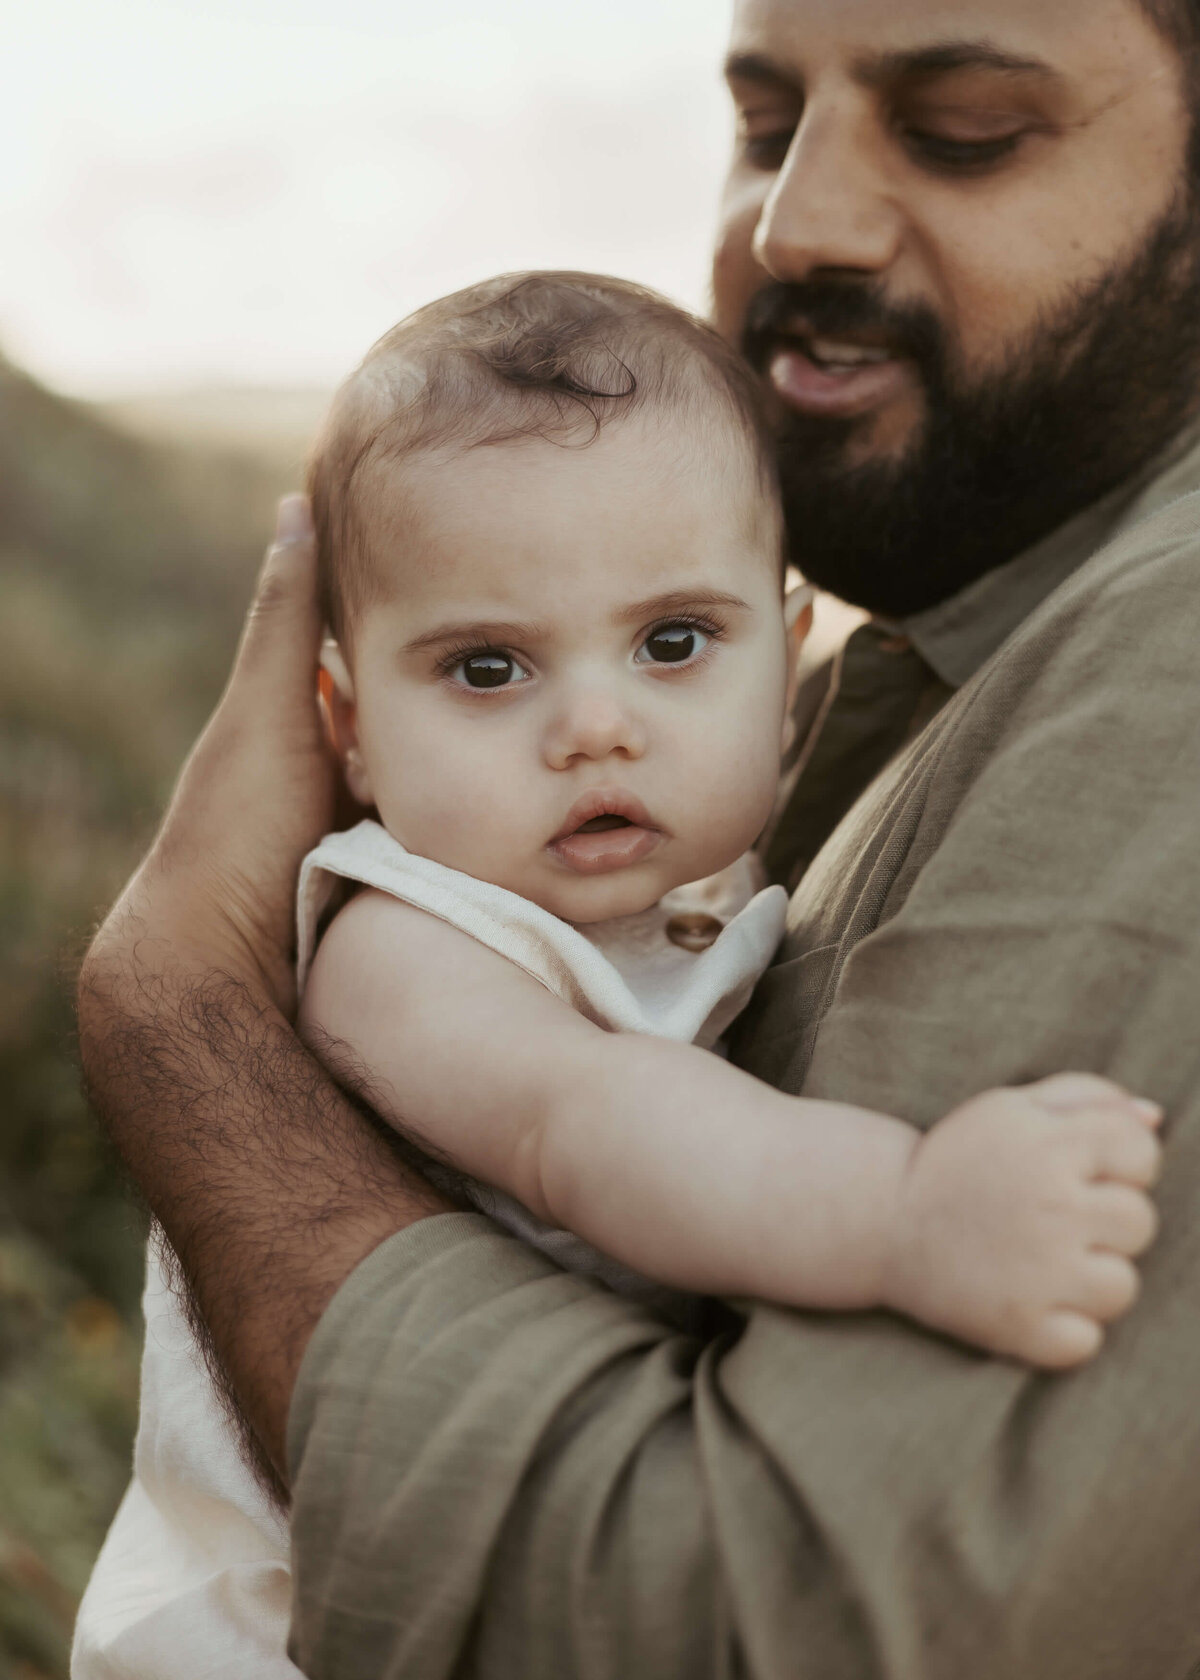 A beautiful baby staring into the camera while his dad's arms.